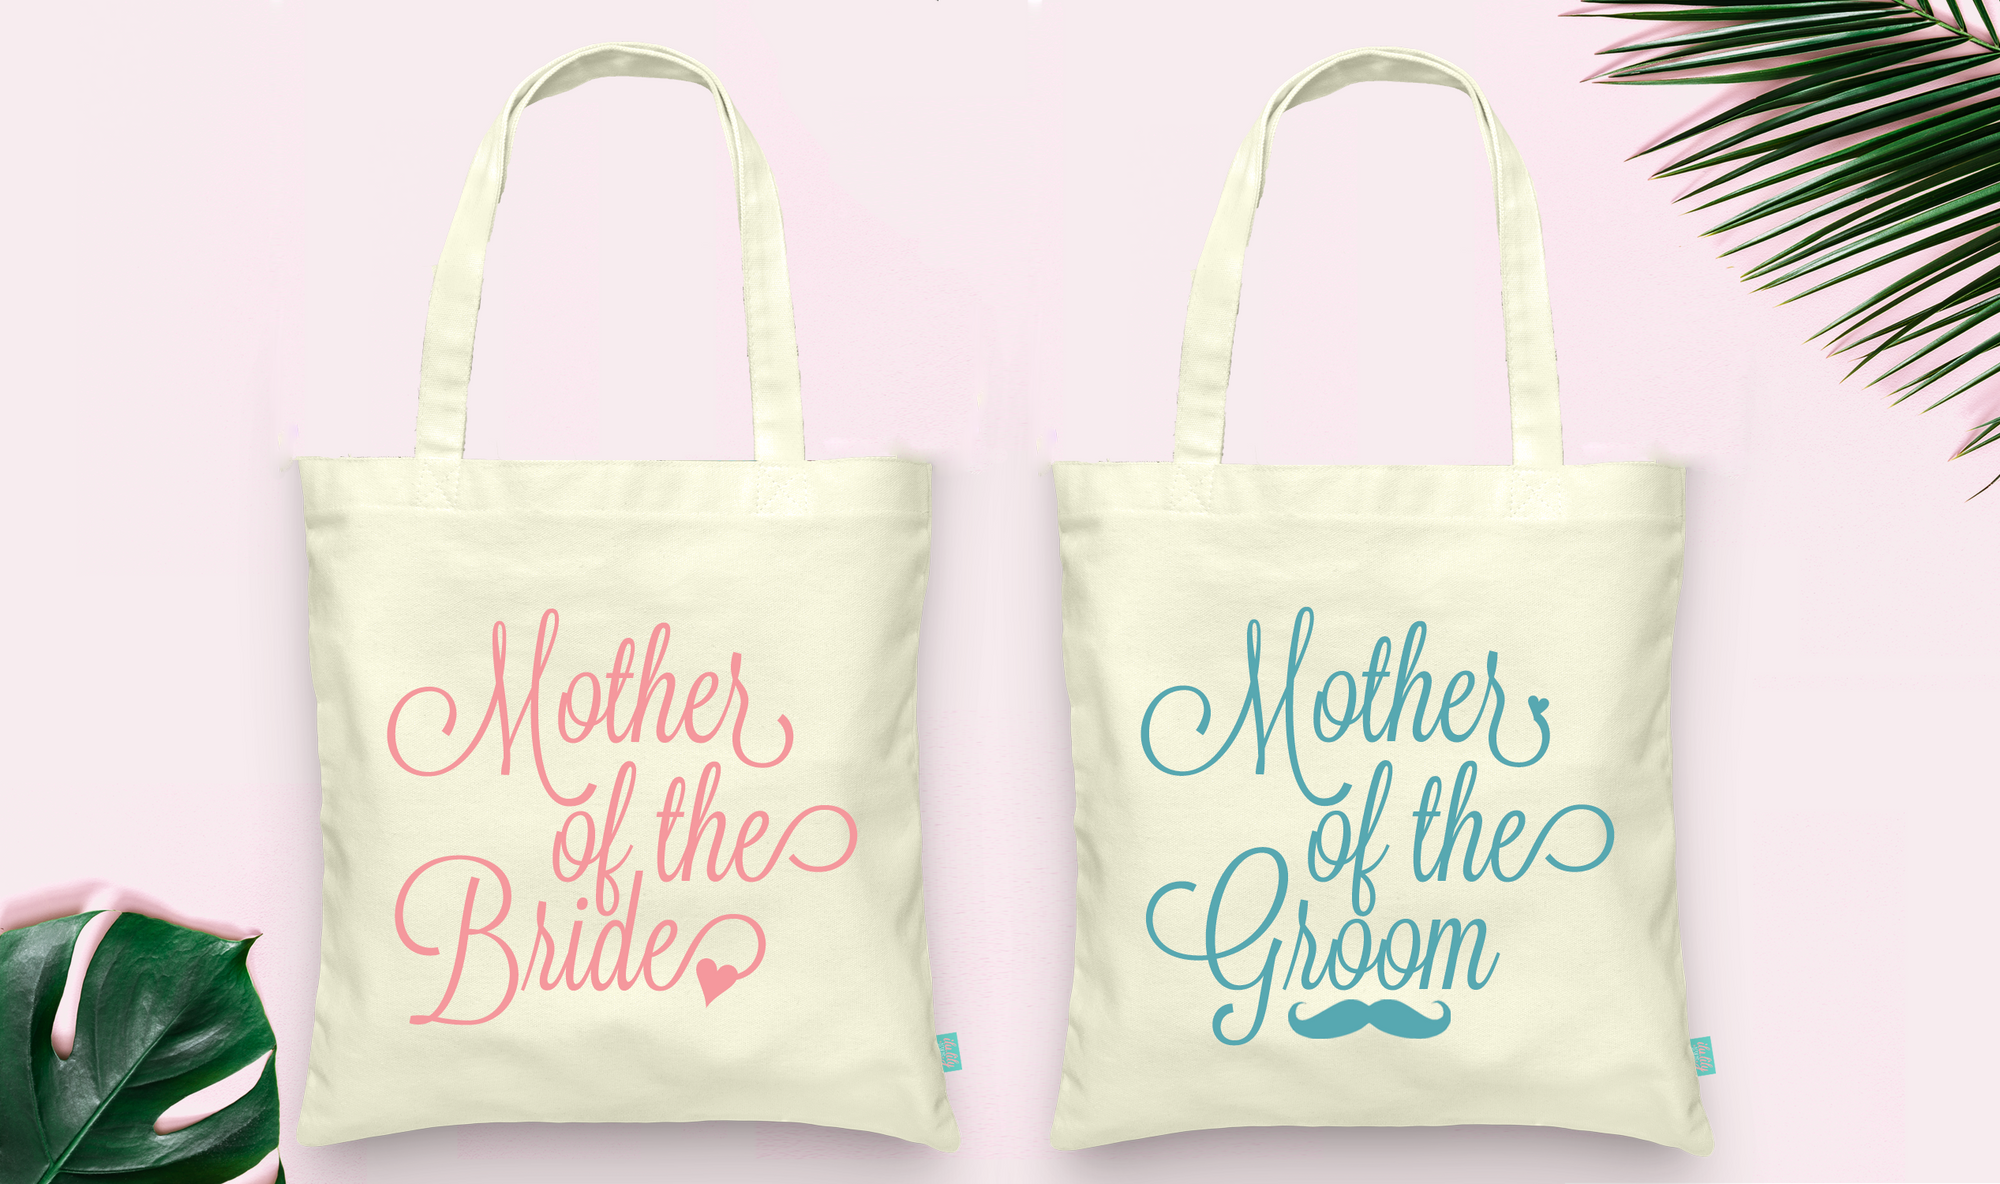 Mother of the Bride & Mother of the Groom Tote Set